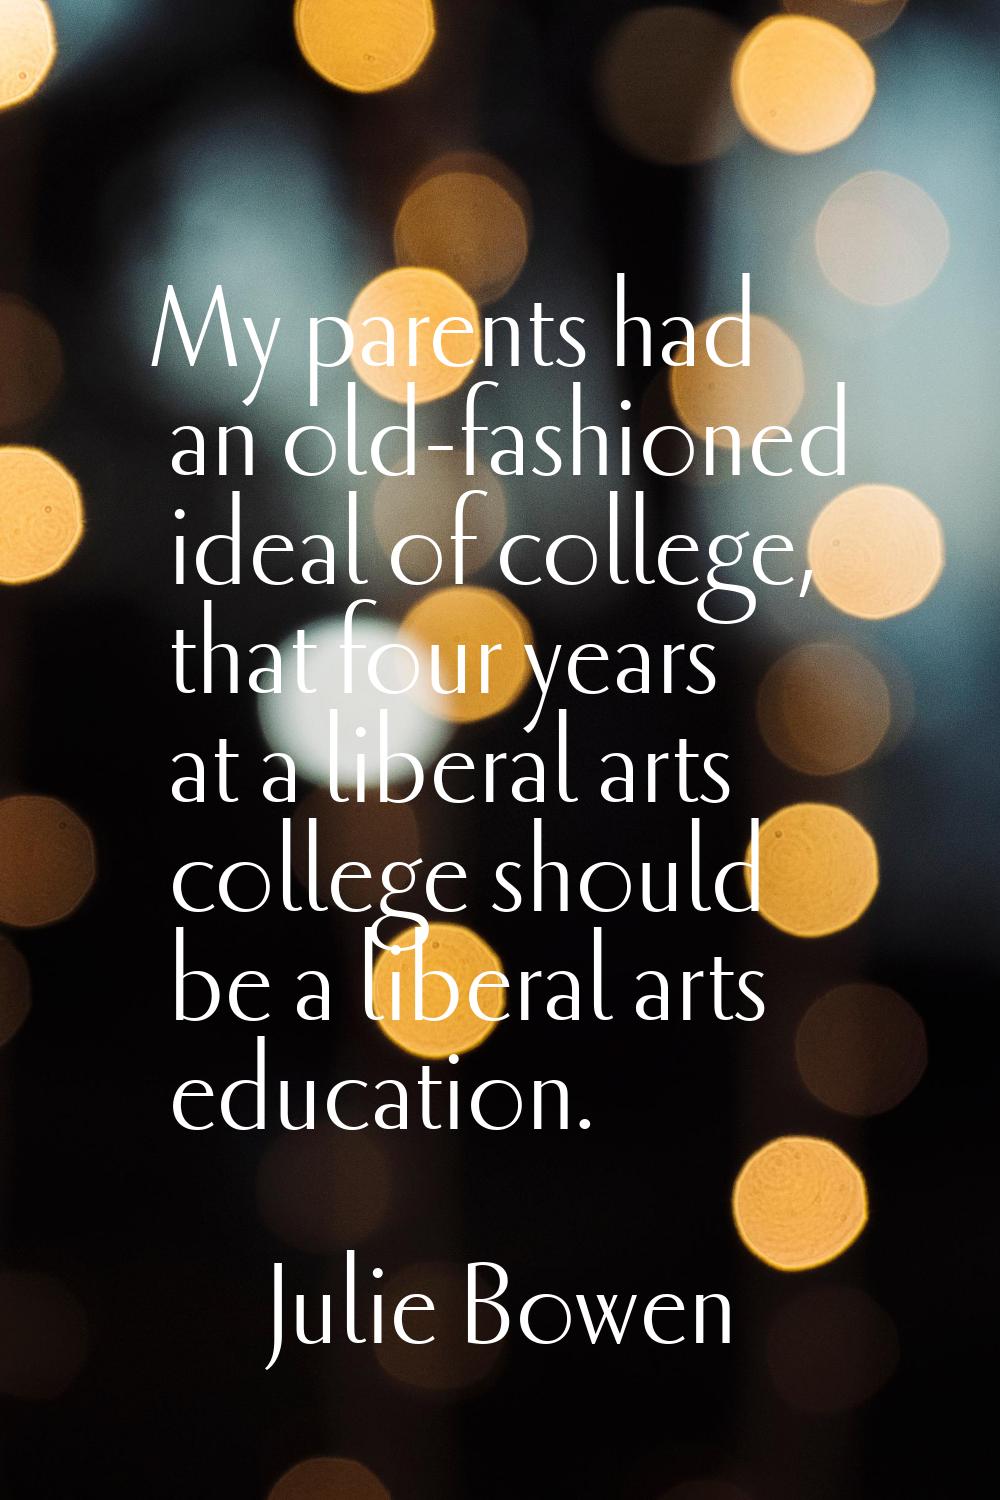 My parents had an old-fashioned ideal of college, that four years at a liberal arts college should 